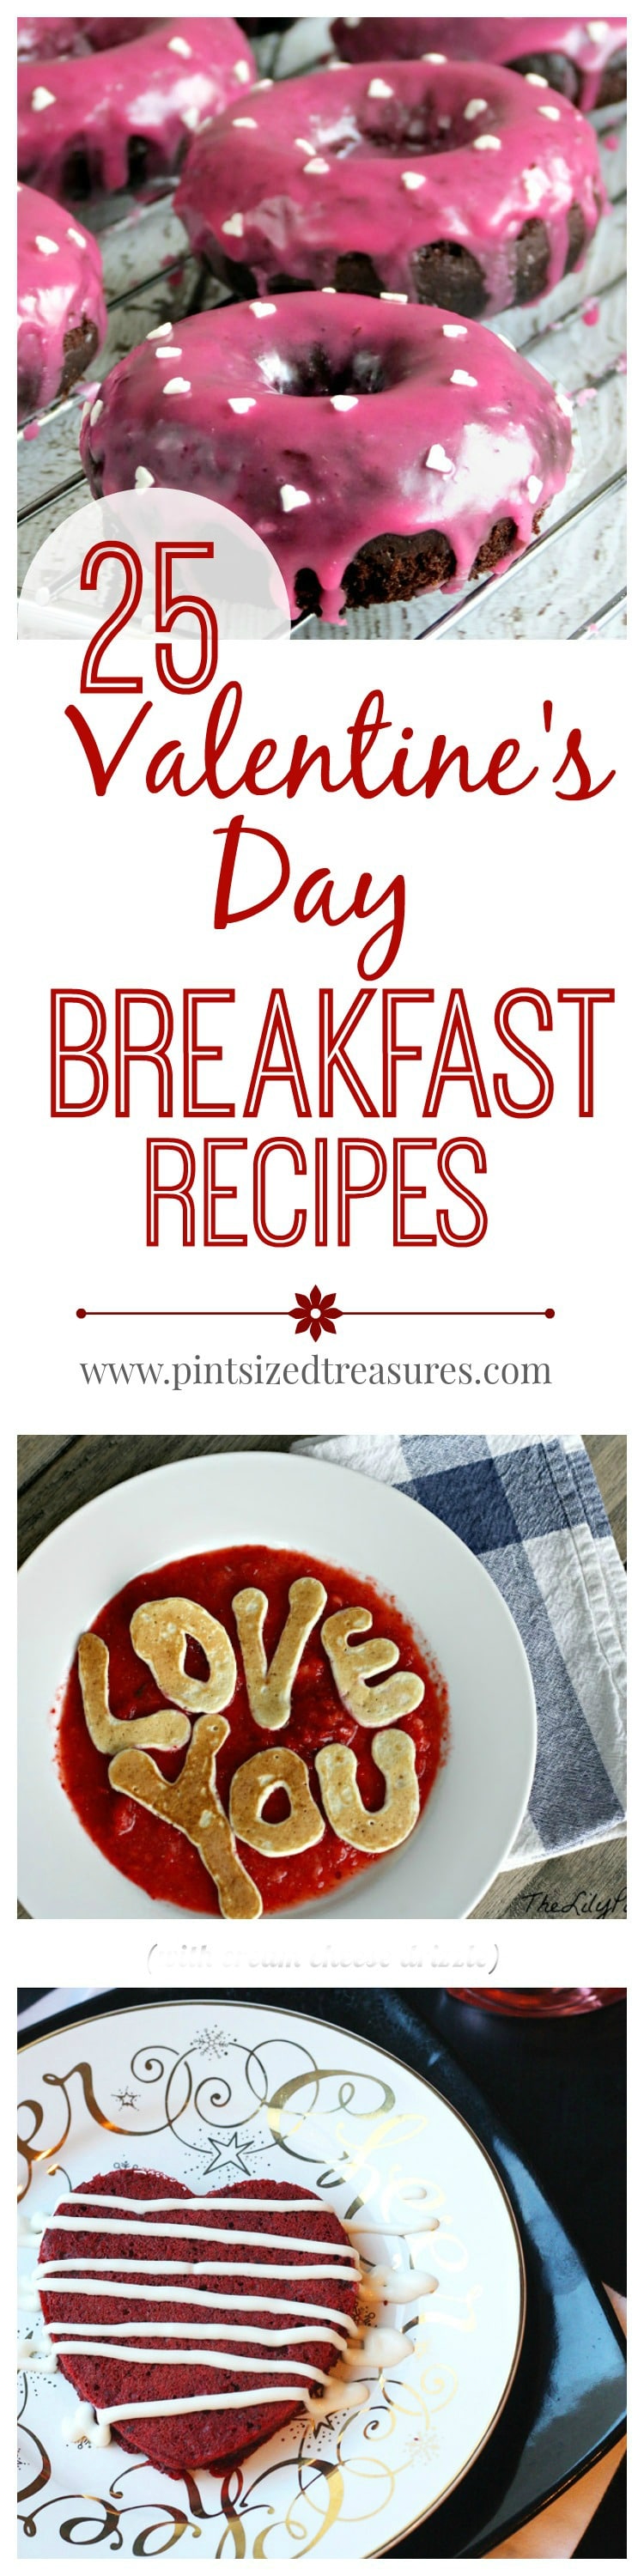 25 Valentine's Day Breakfast Recipes from Pint Size Treasures